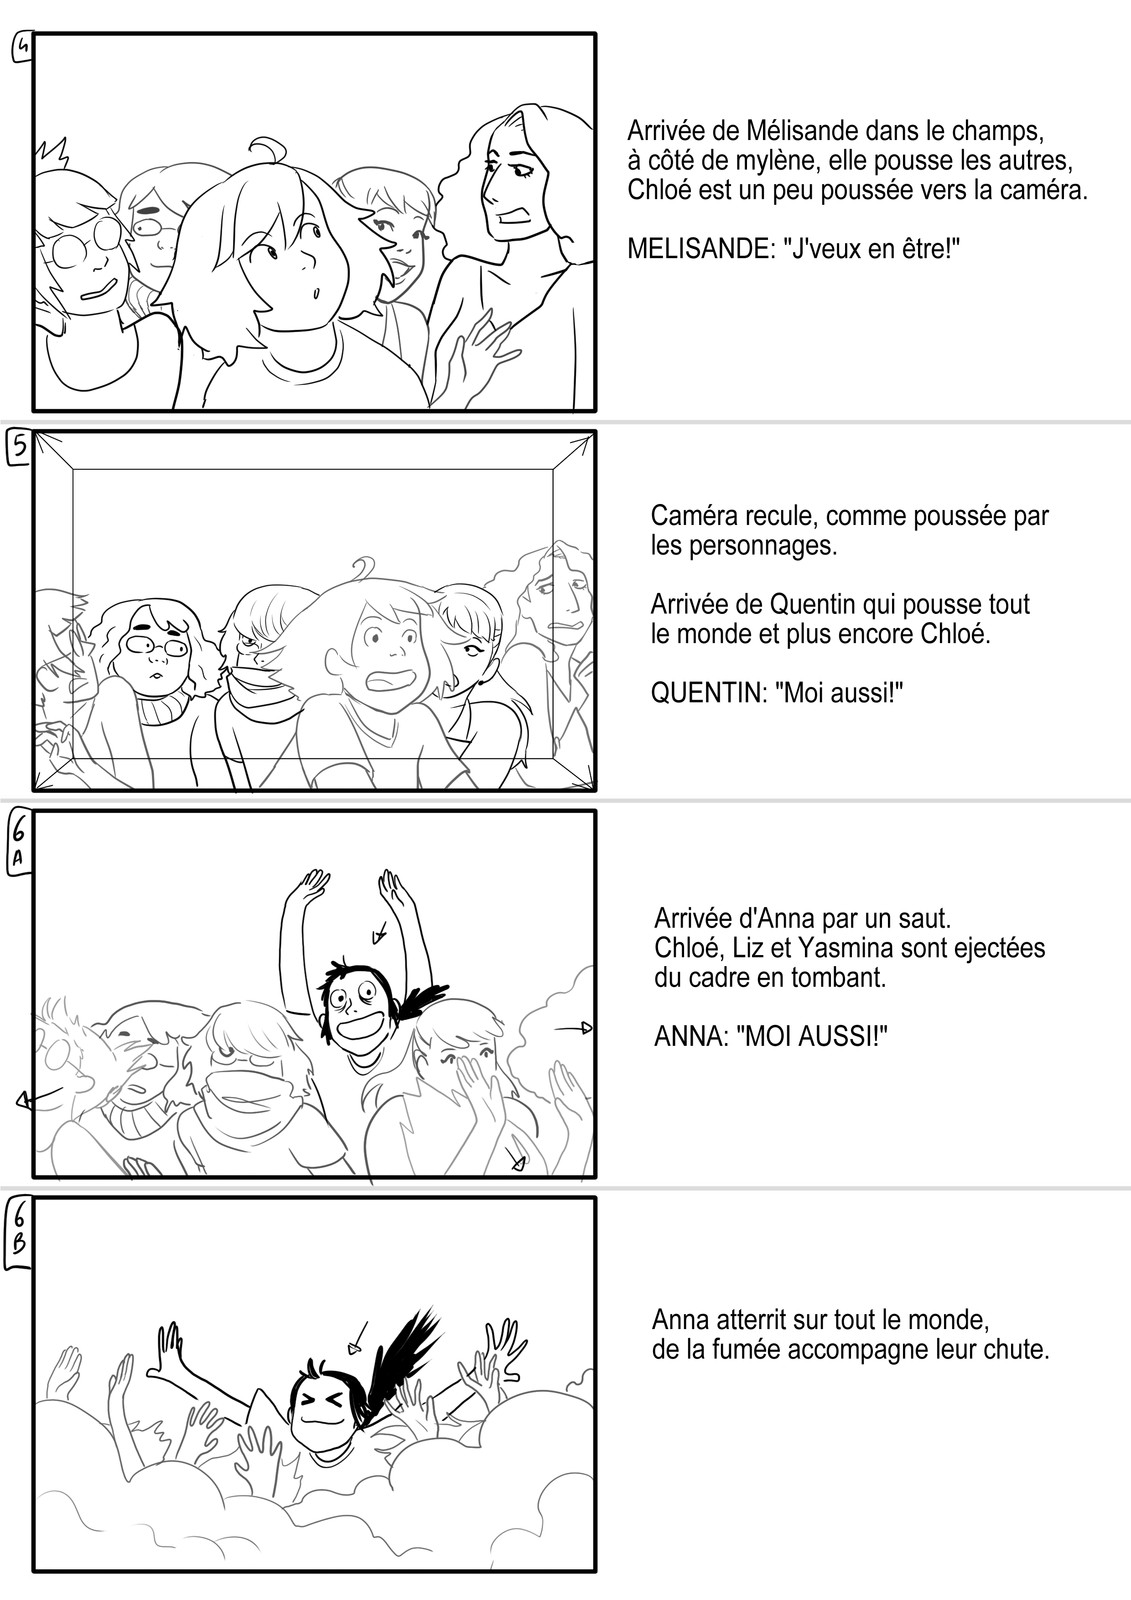 Storyboard for an animated Short
- Page 3 - (In French)